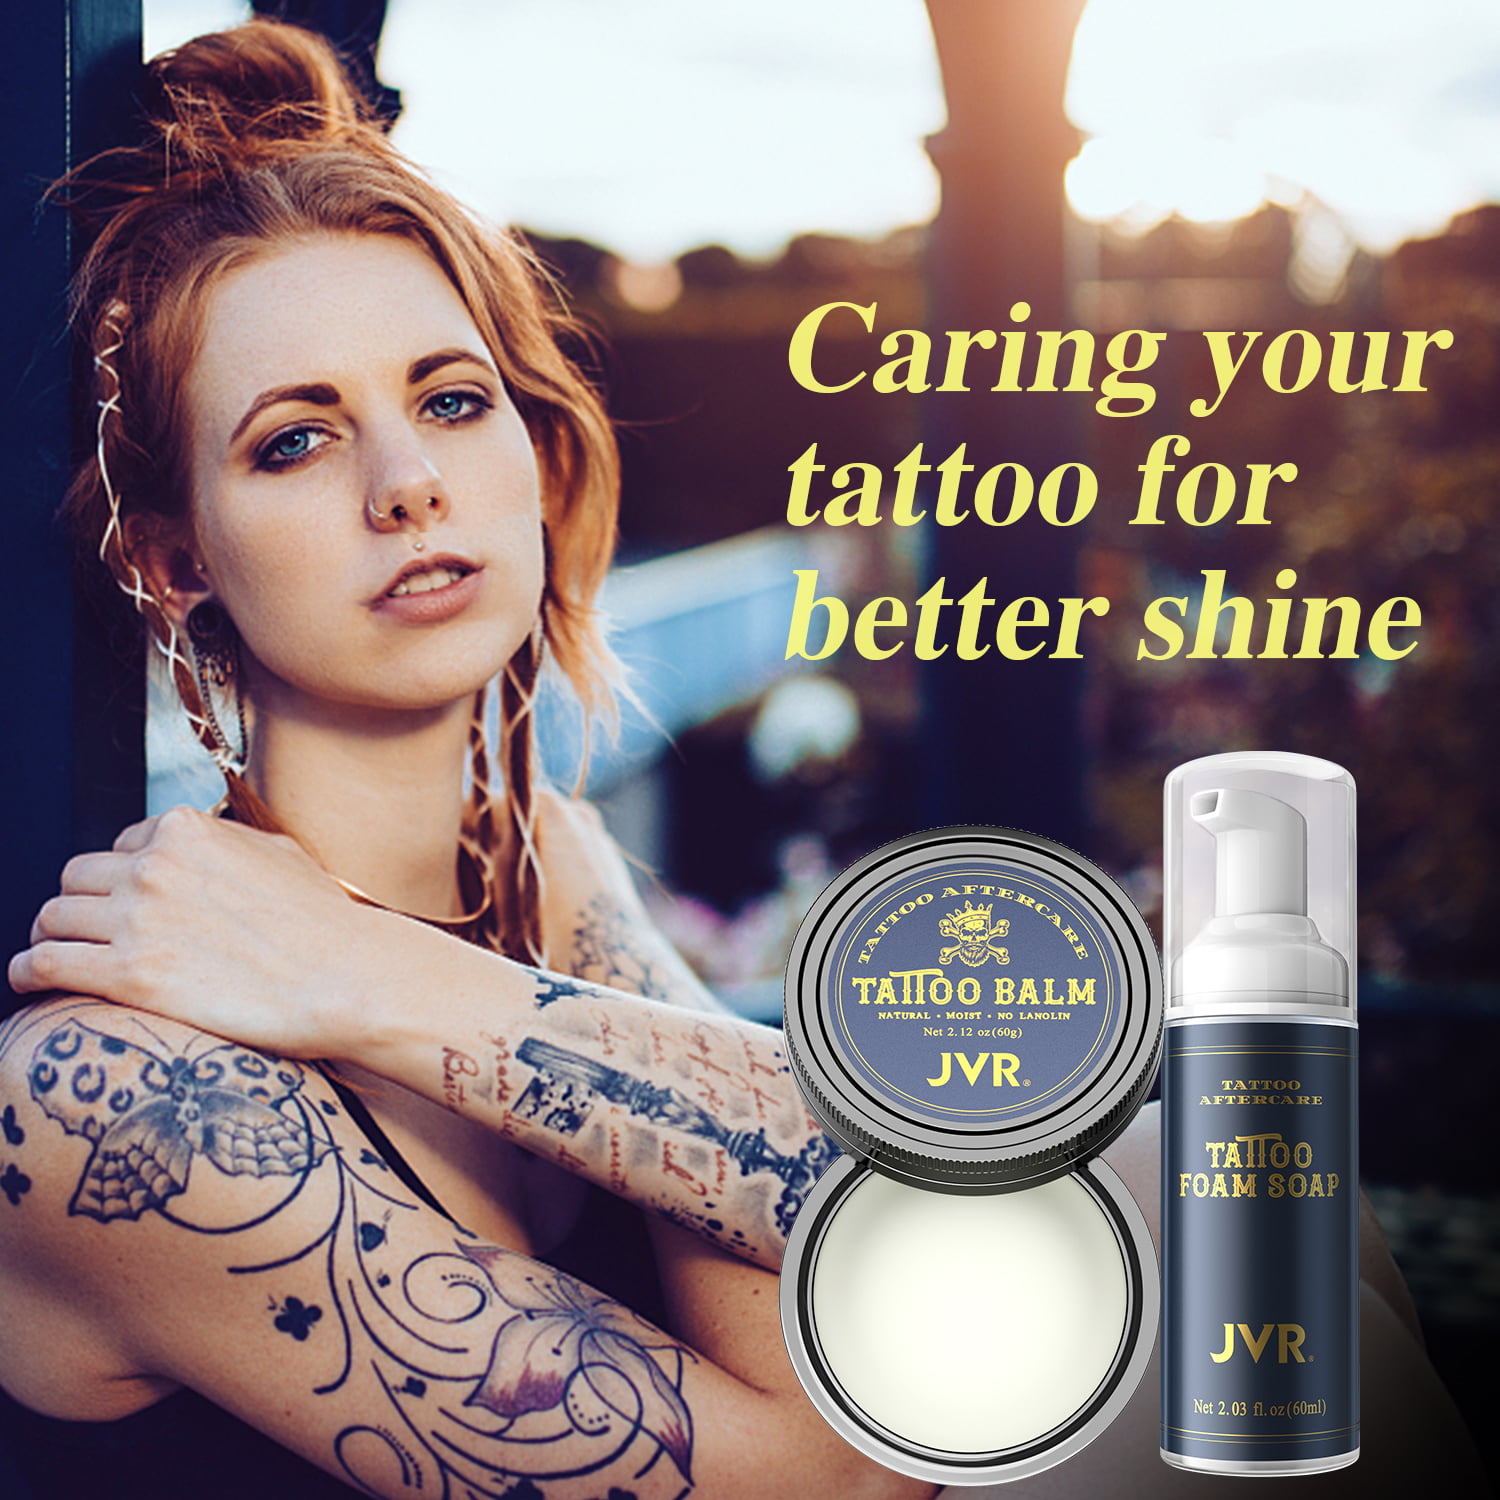 Tattoos: How Can You Take Care of Them? SweetCare United States